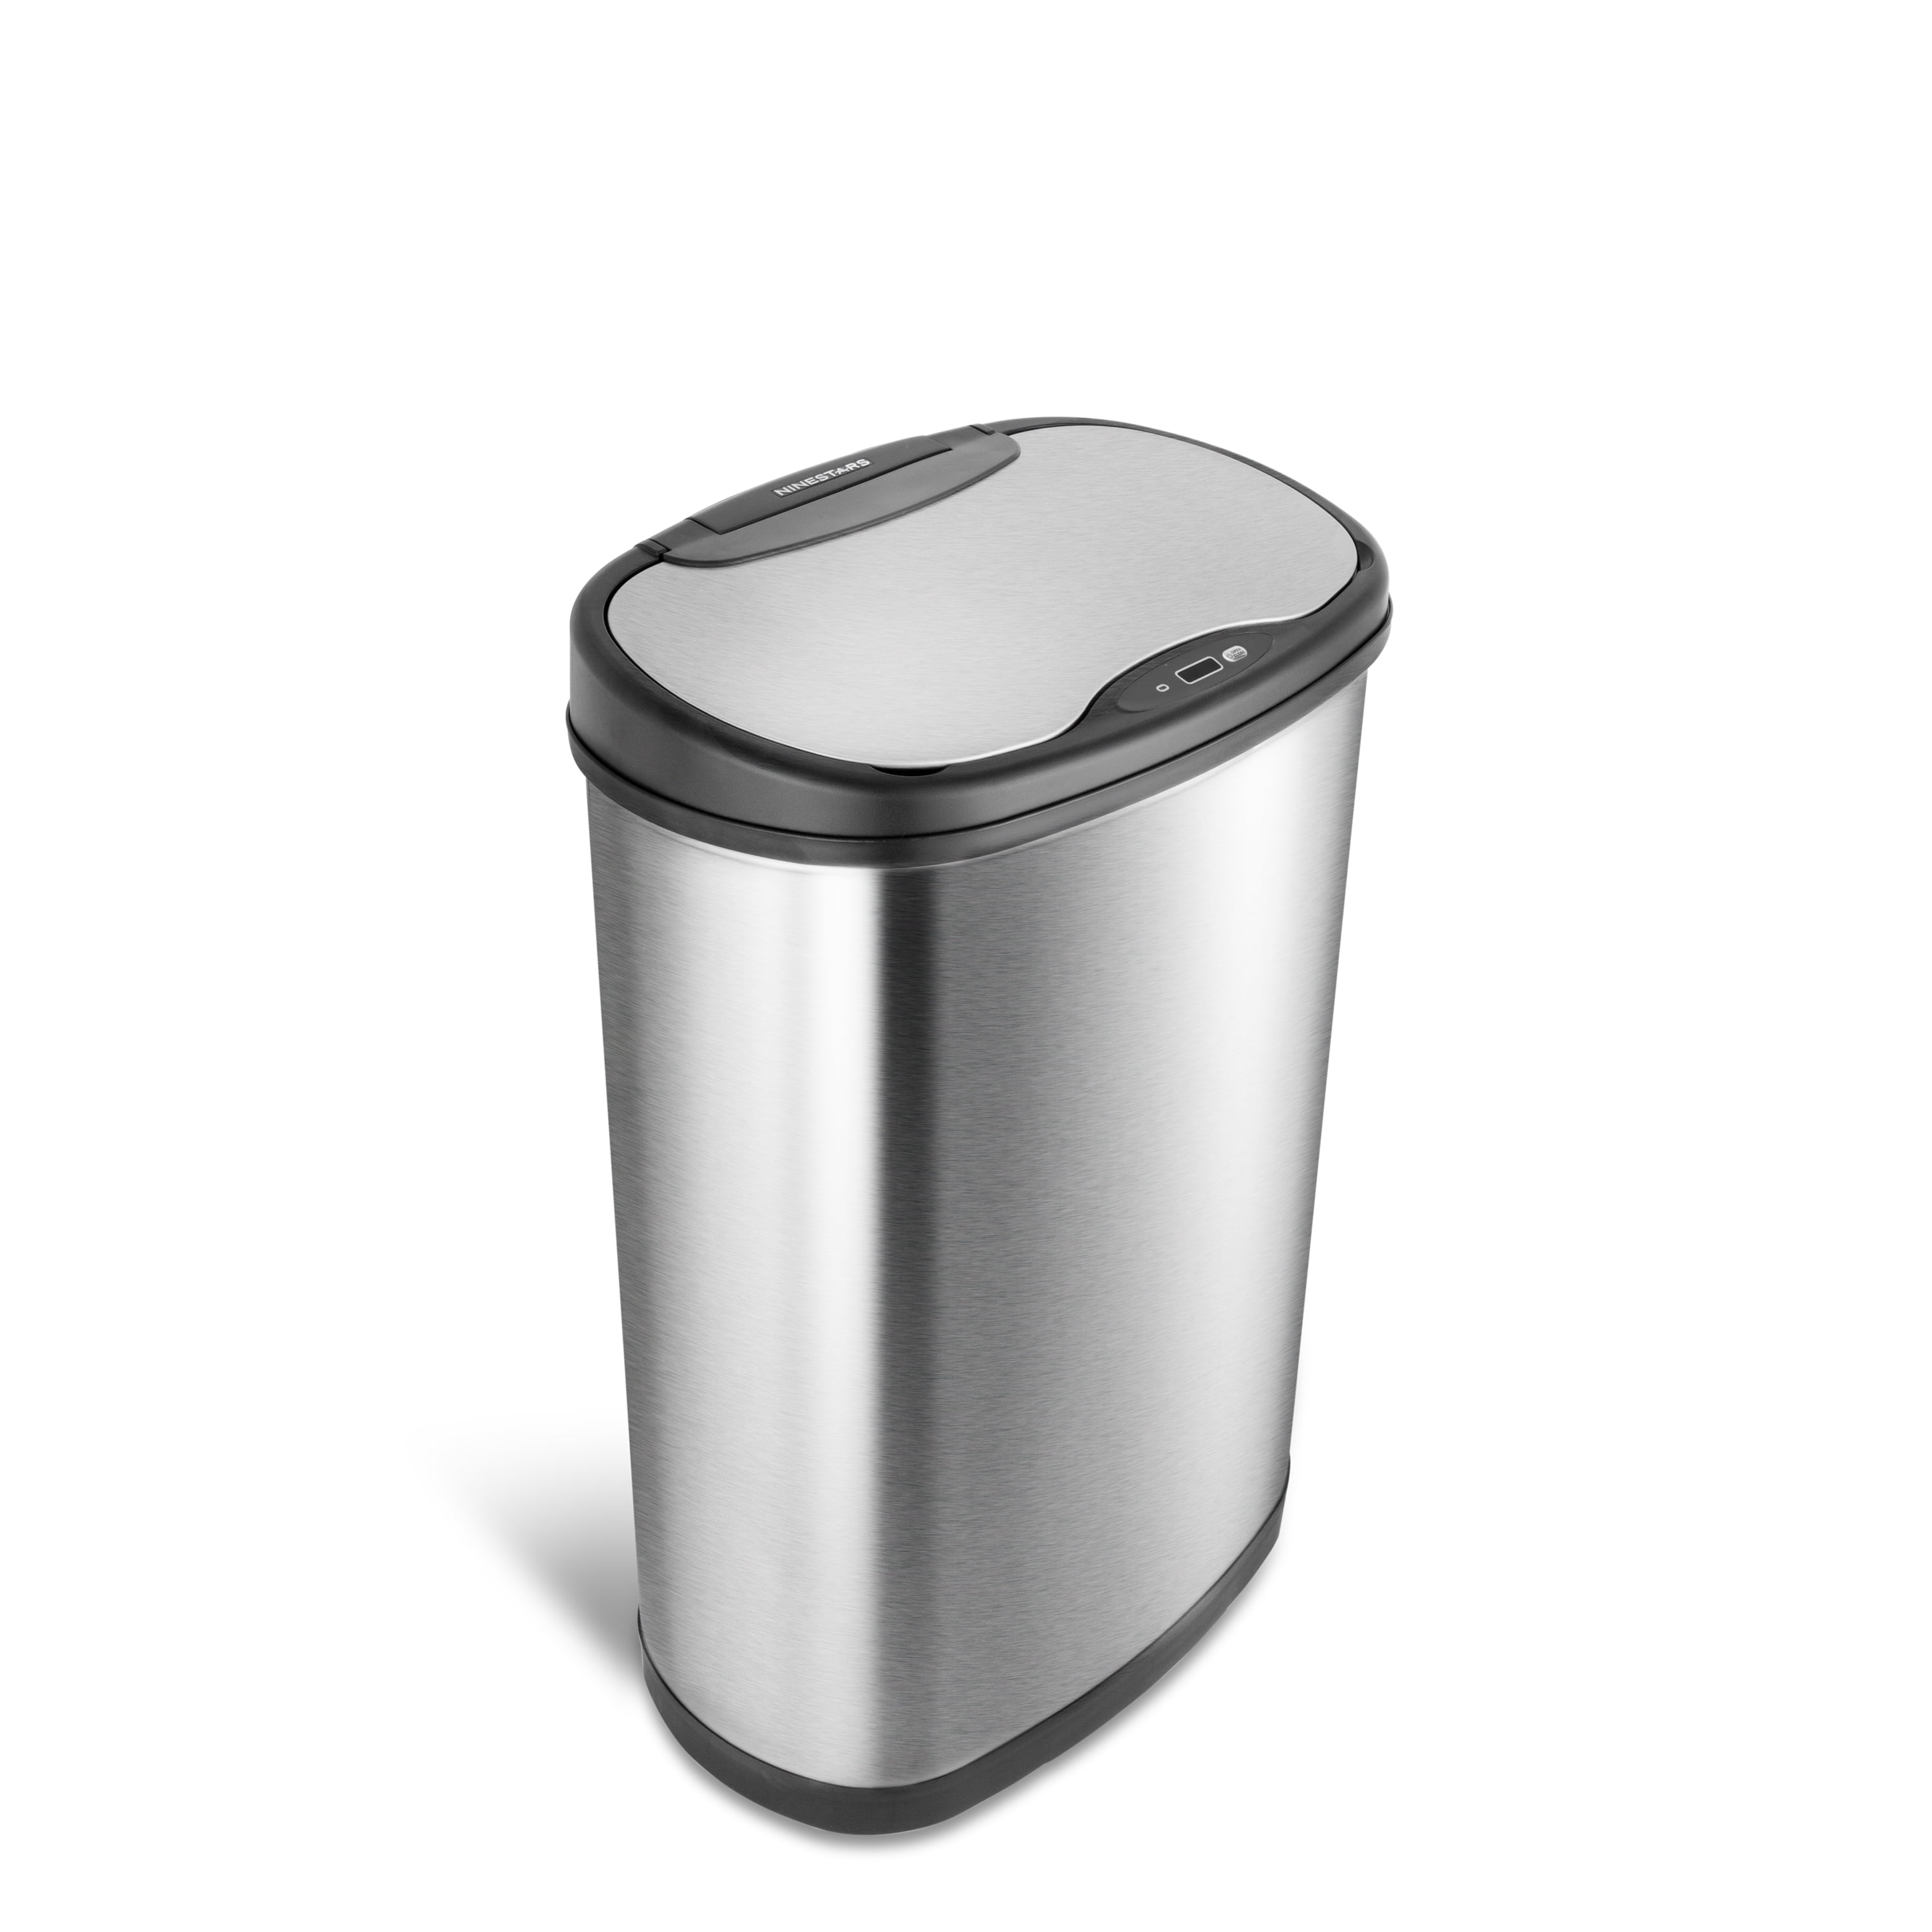 13.2 Gal/50 L Motion Sensor Trash Can Stainless Steel Details about   Mainstays 